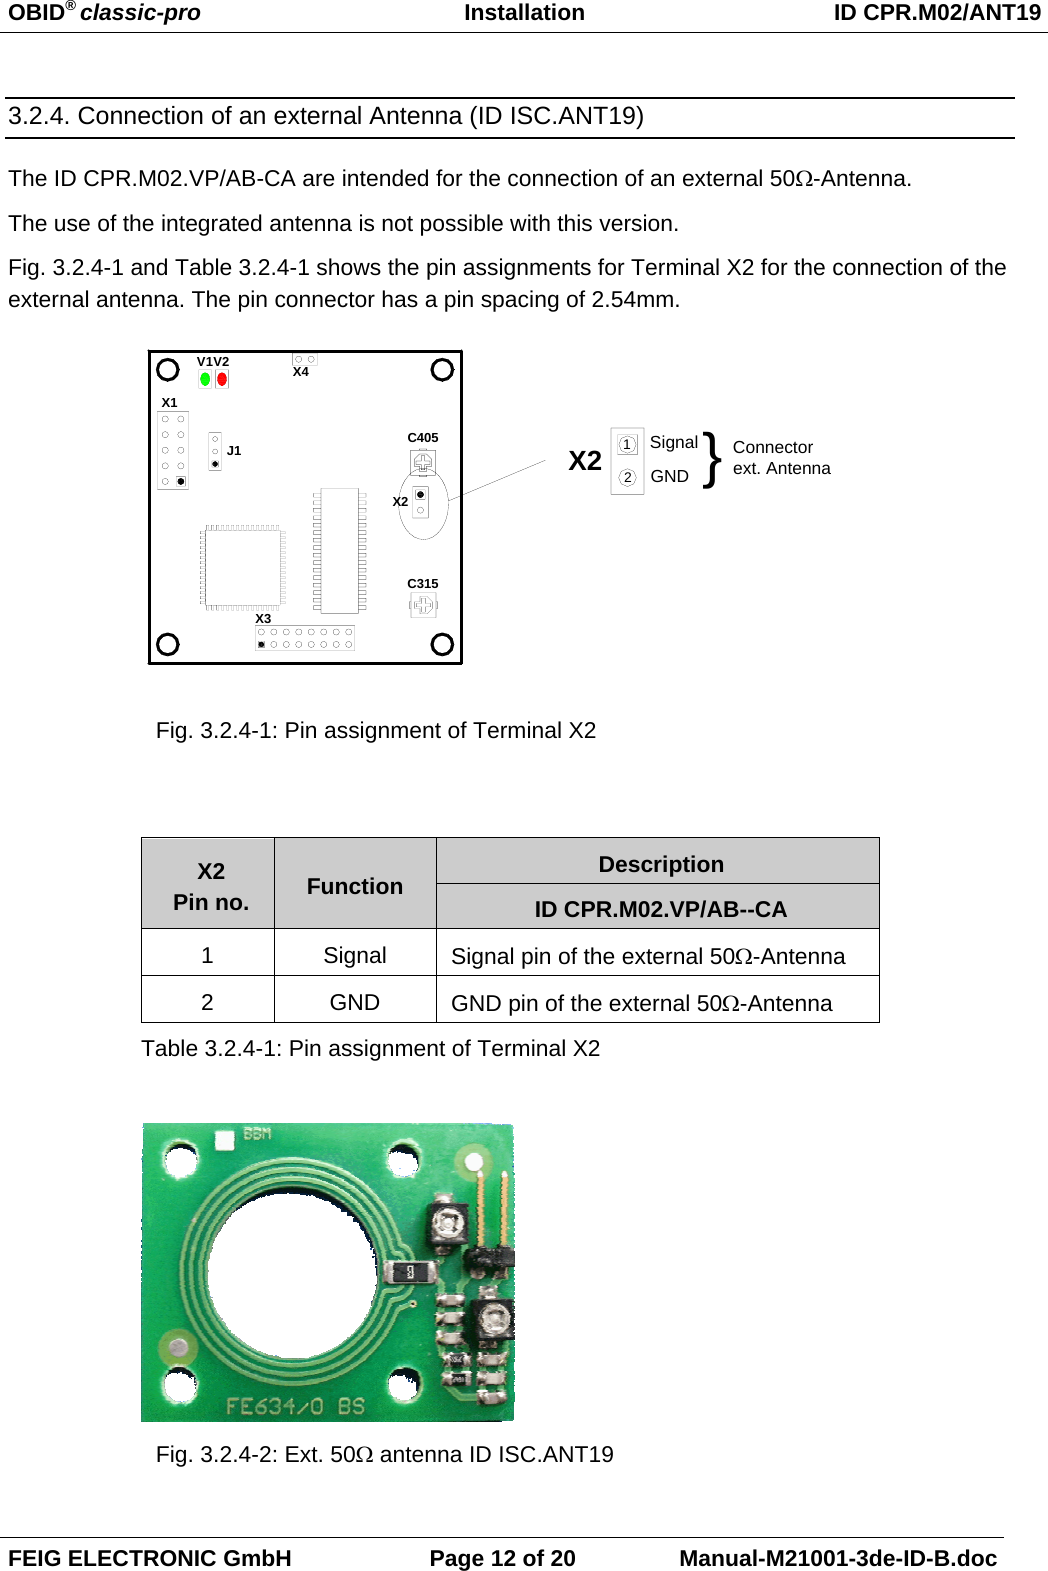 OBID® classic-pro Installation ID CPR.M02/ANT19FEIG ELECTRONIC GmbH Page 12 of 20 Manual-M21001-3de-ID-B.doc3.2.4. Connection of an external Antenna (ID ISC.ANT19)The ID CPR.M02.VP/AB-CA are intended for the connection of an external 50Ω-Antenna.The use of the integrated antenna is not possible with this version. Fig. 3.2.4-1 and Table 3.2.4-1 shows the pin assignments for Terminal X2 for the connection of theexternal antenna. The pin connector has a pin spacing of 2.54mm.Fig. 3.2.4-1: Pin assignment of Terminal X2DescriptionX2Pin no. Function ID CPR.M02.VP/AB--CA1Signal Signal pin of the external 50Ω-Antenna2GND GND pin of the external 50Ω-AntennaTable 3.2.4-1: Pin assignment of Terminal X2Fig. 3.2.4-2: Ext. 50Ω antenna ID ISC.ANT19X1J1V2V1C315X3X4X2 Connectorext. AntennaGNDSignal }12C405X2